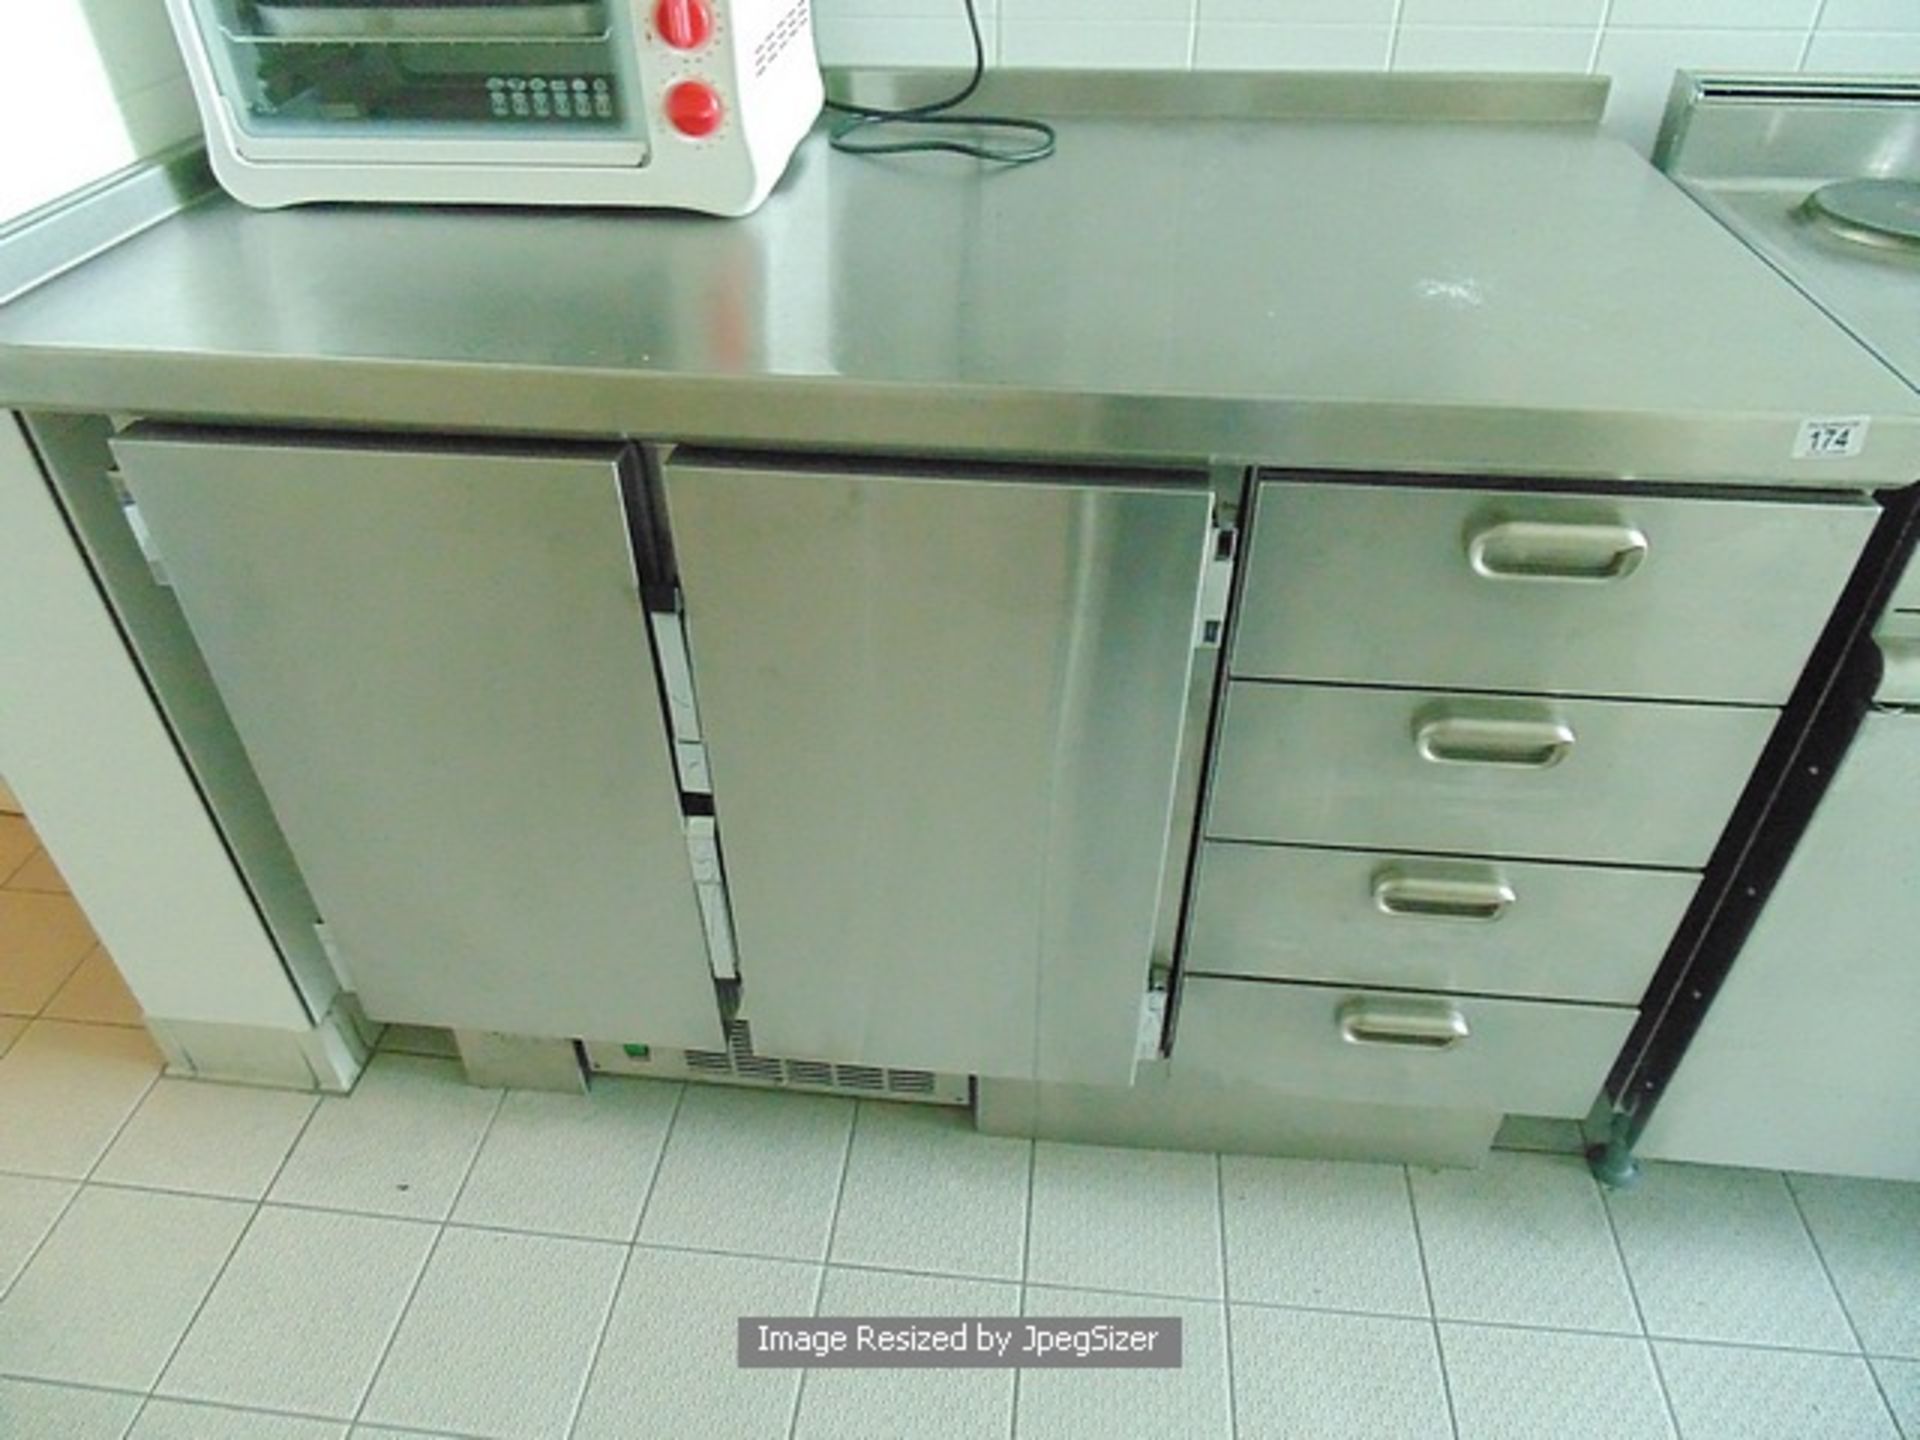 Moffat stainless steel two door under counter bench chiller complete with four drawer cupboard - Image 2 of 2